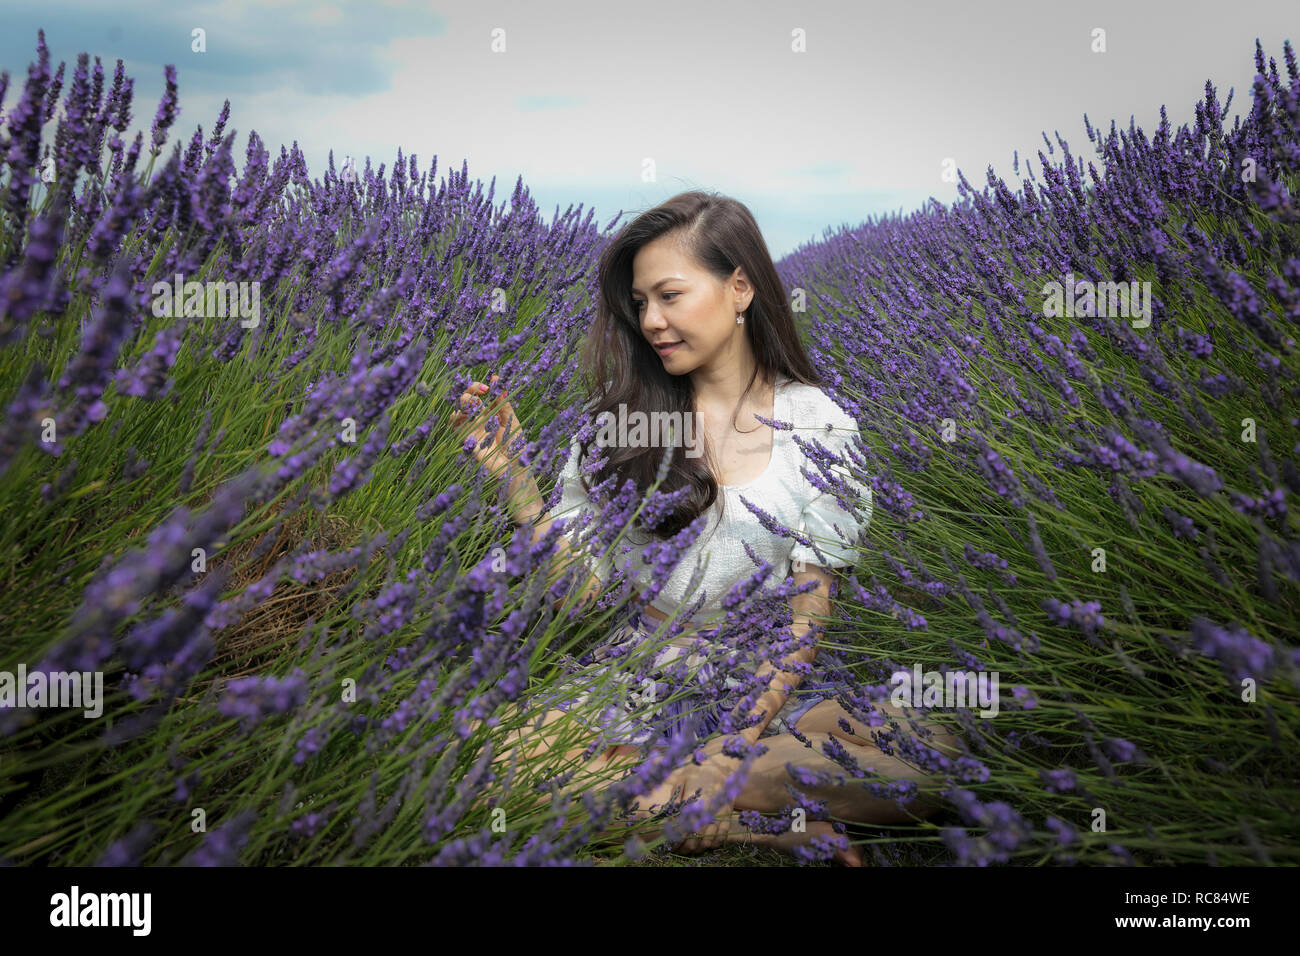 Mid adult woman with long brown hair sitting crosslegged in lavender field Stock Photo